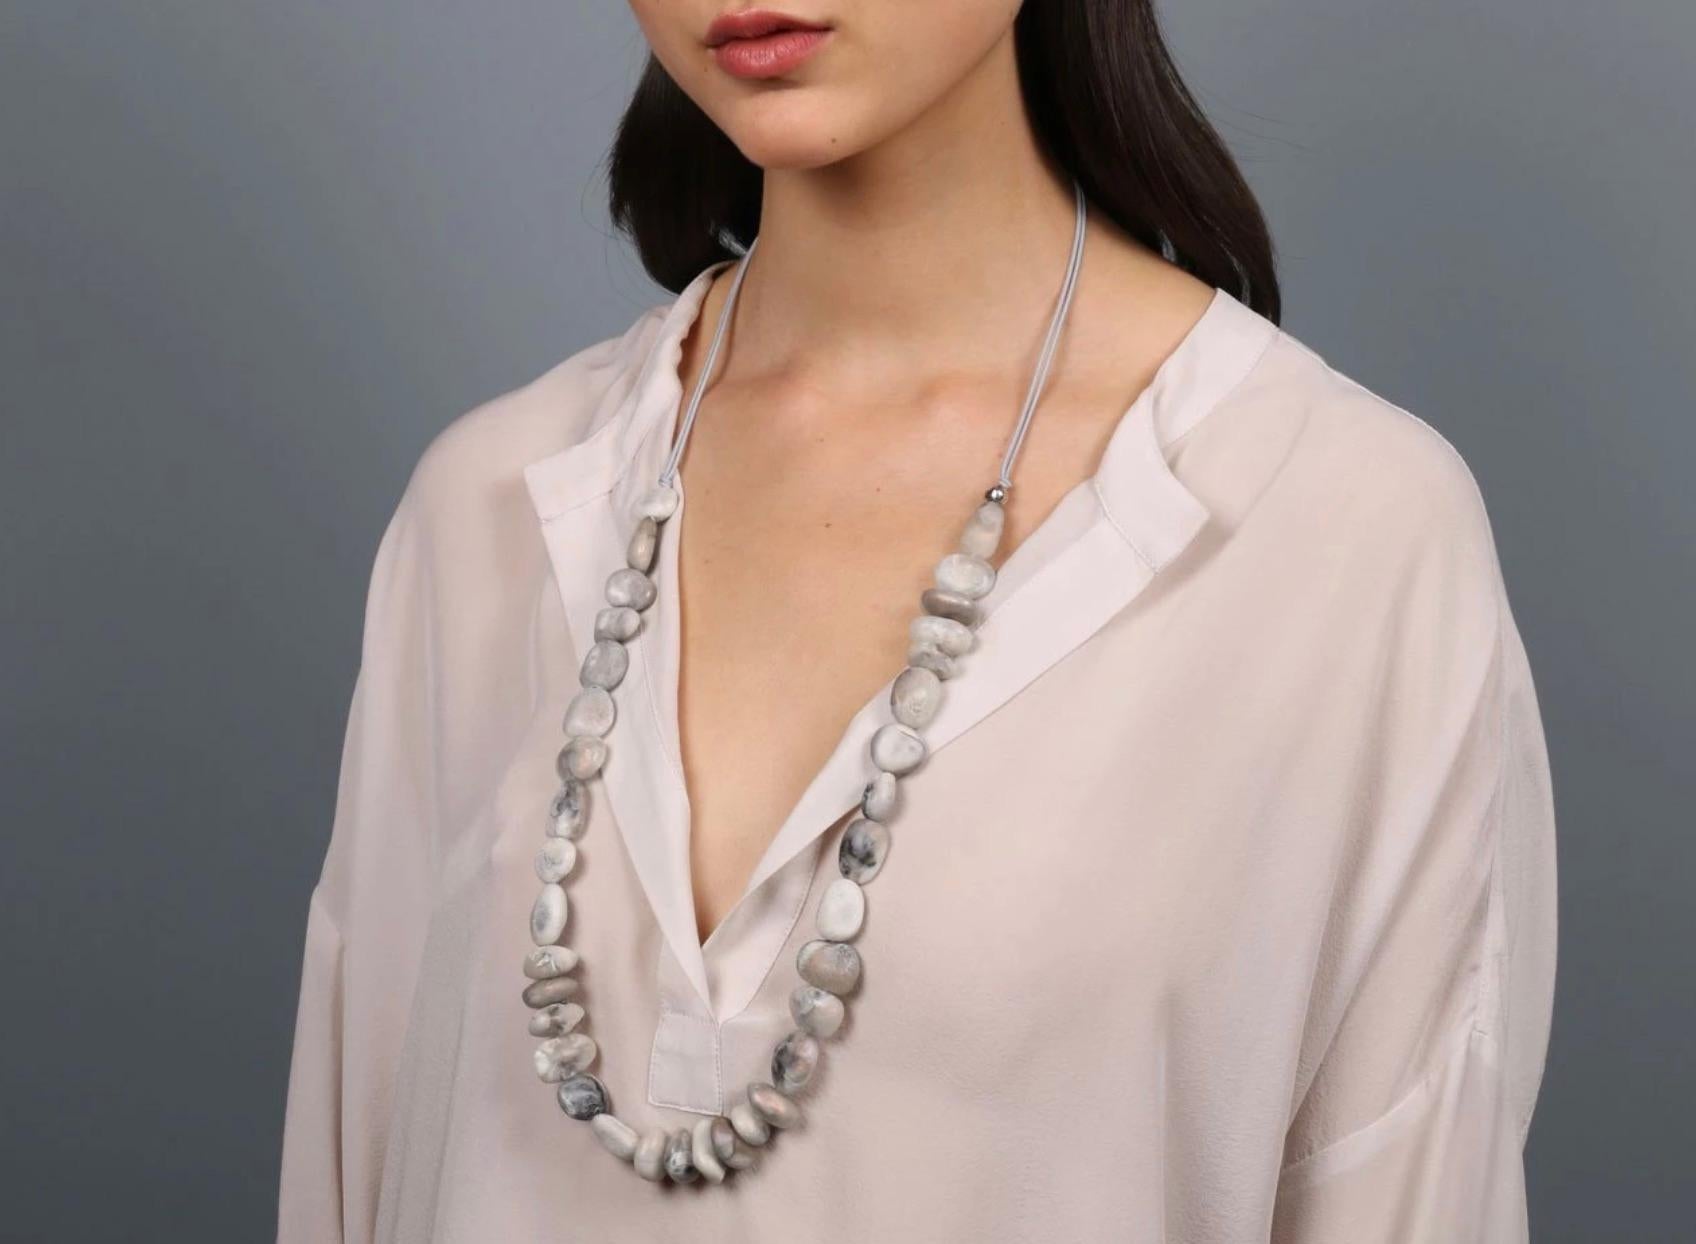 Women's Resin Half Earth Necklace in Sandy Pearl For Sale